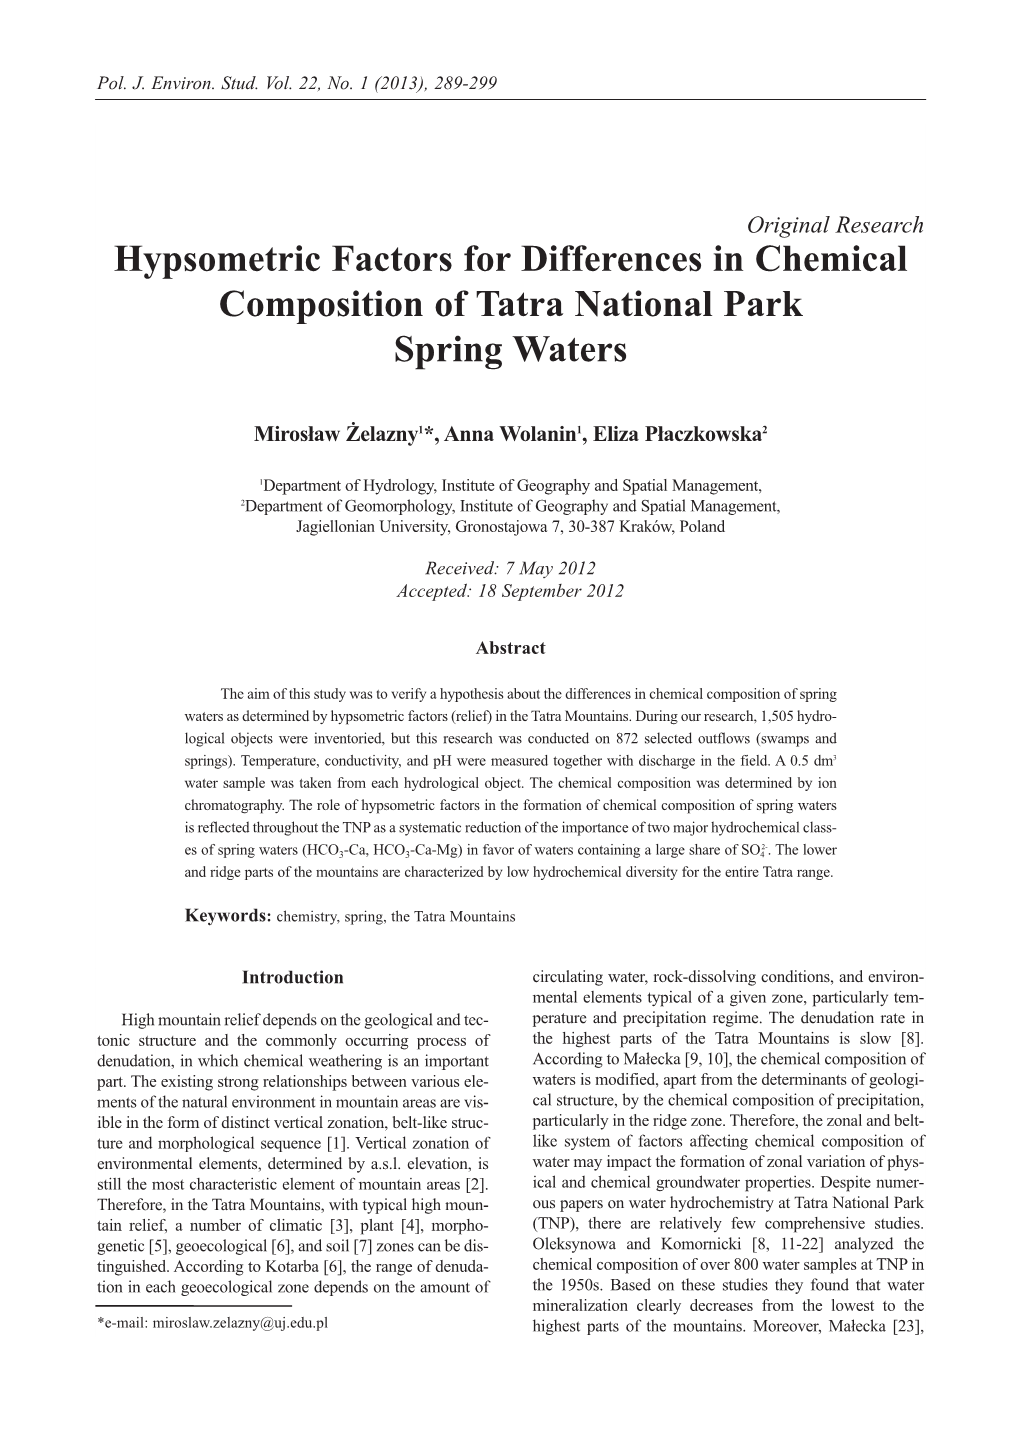 Hypsometric Factors for Differences in Chemical Composition of Tatra National Park Spring Waters